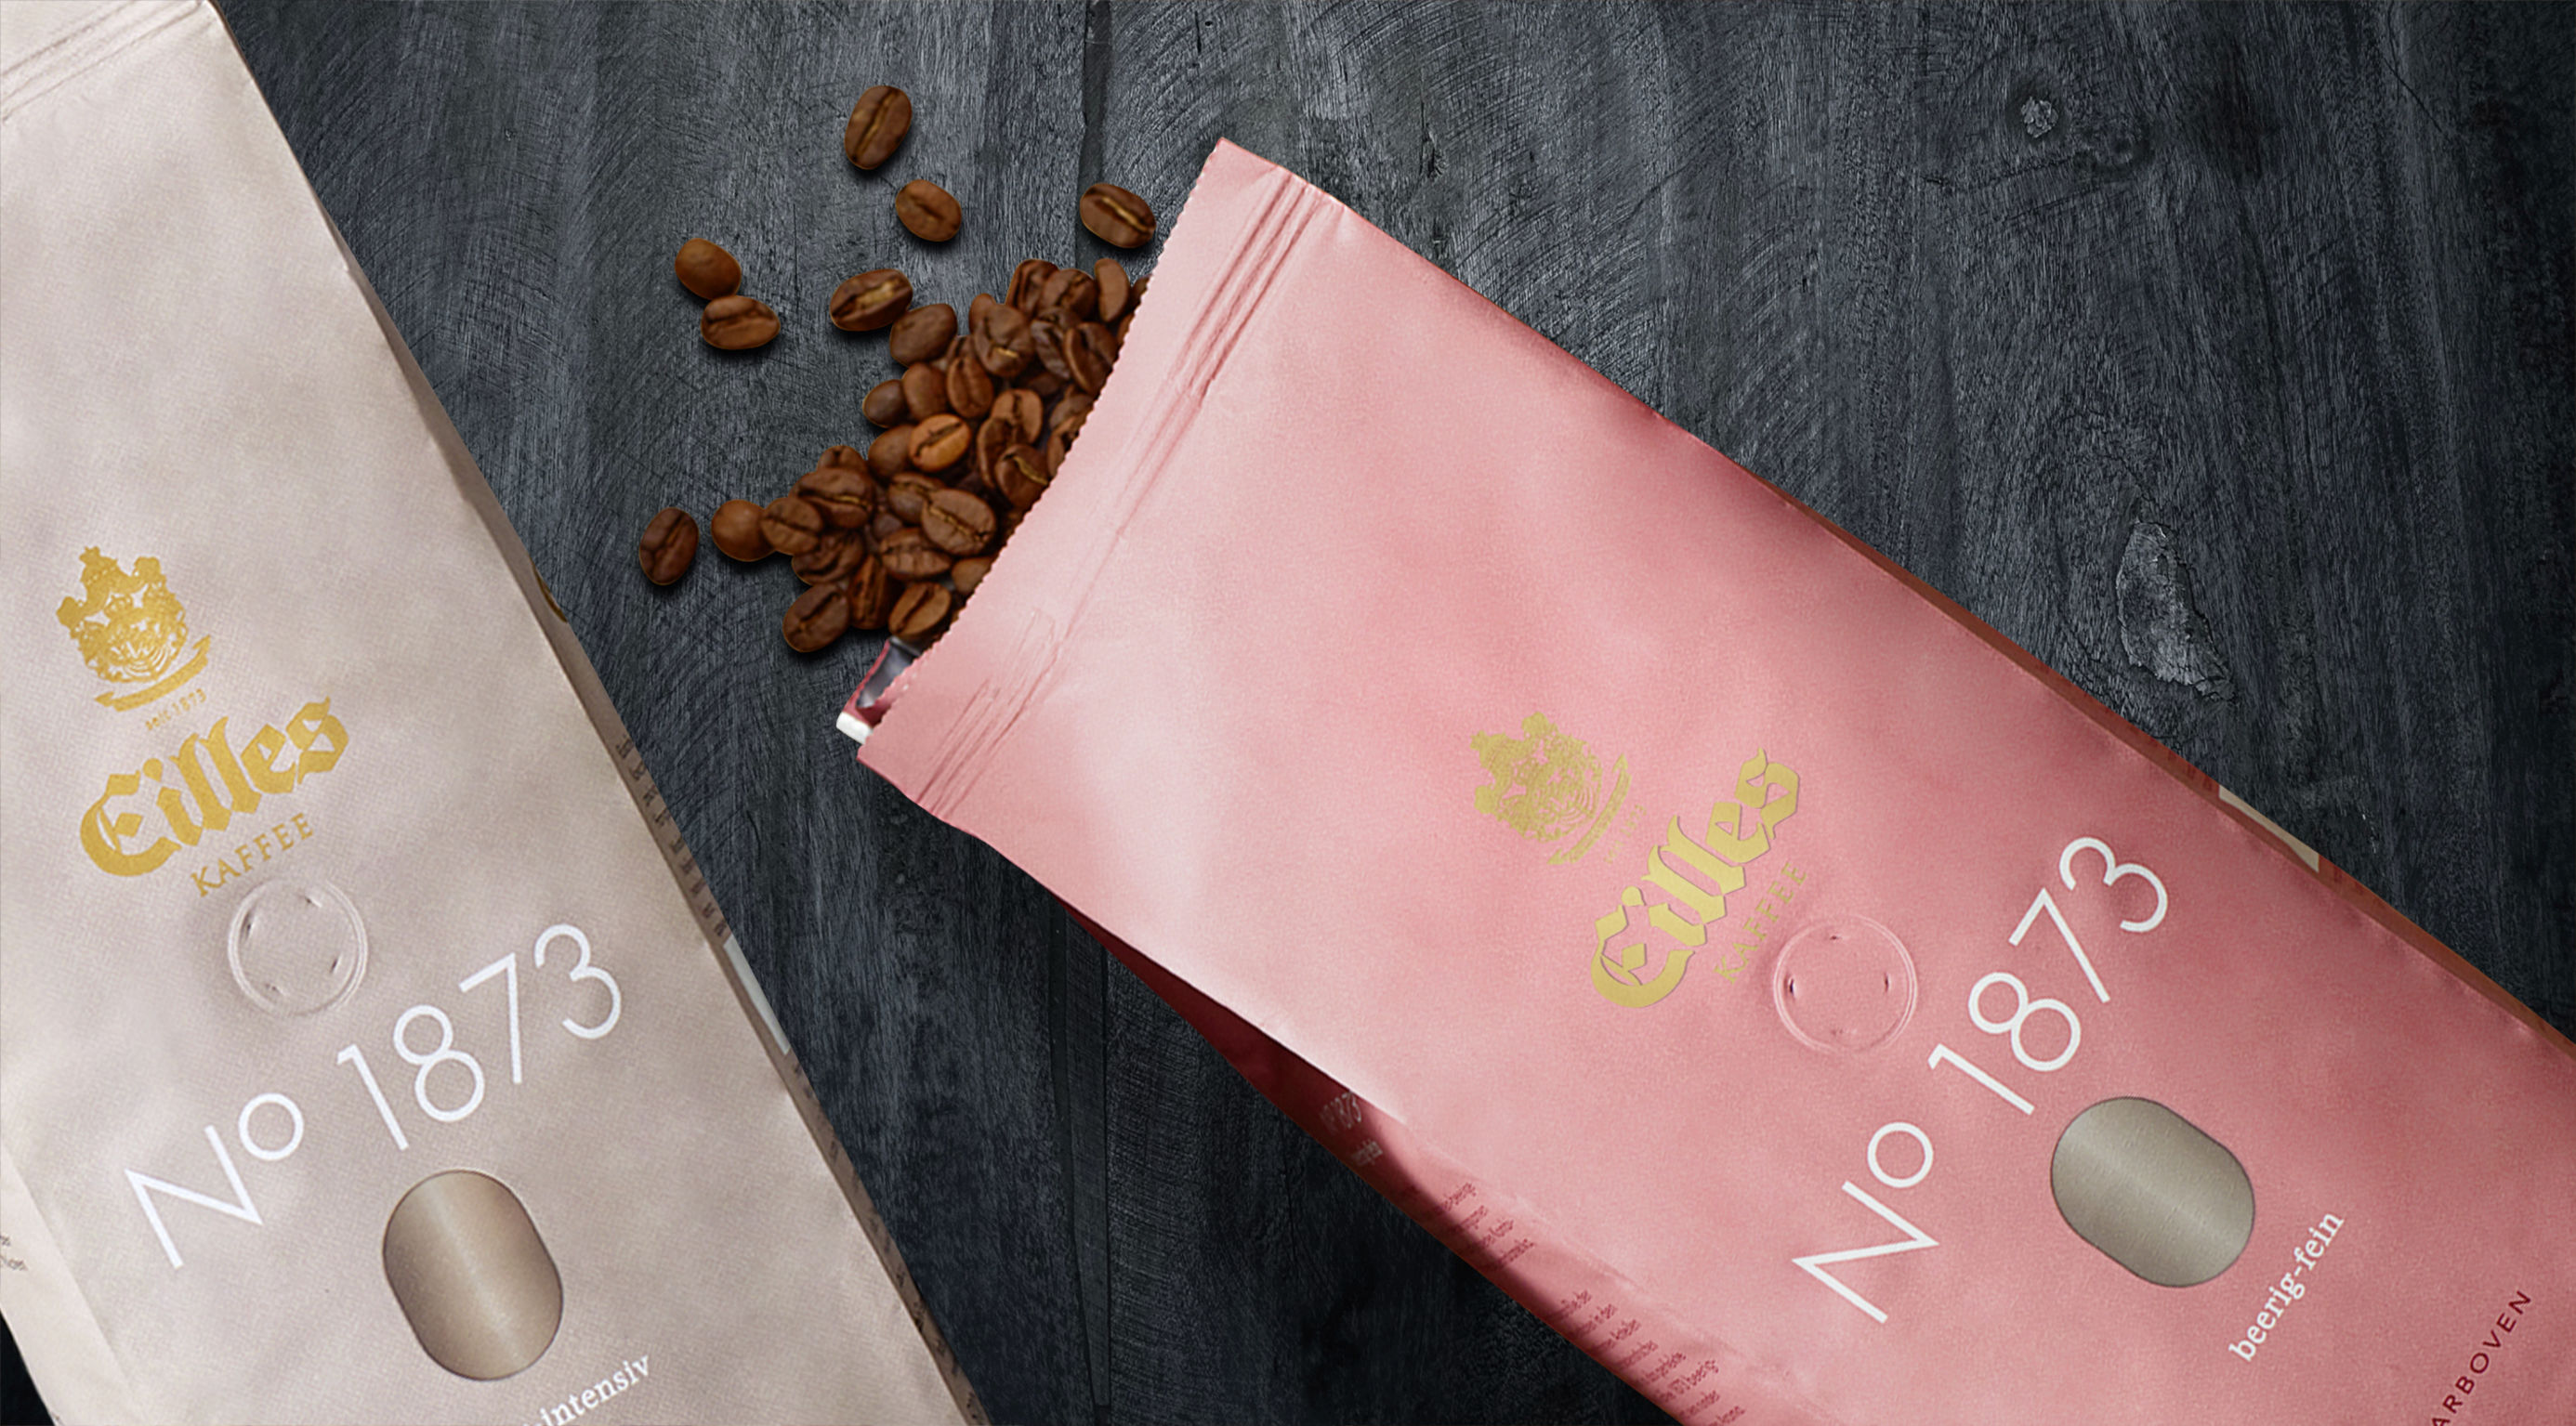 Eilles Coffee No 1873 | Taste for a New Generation